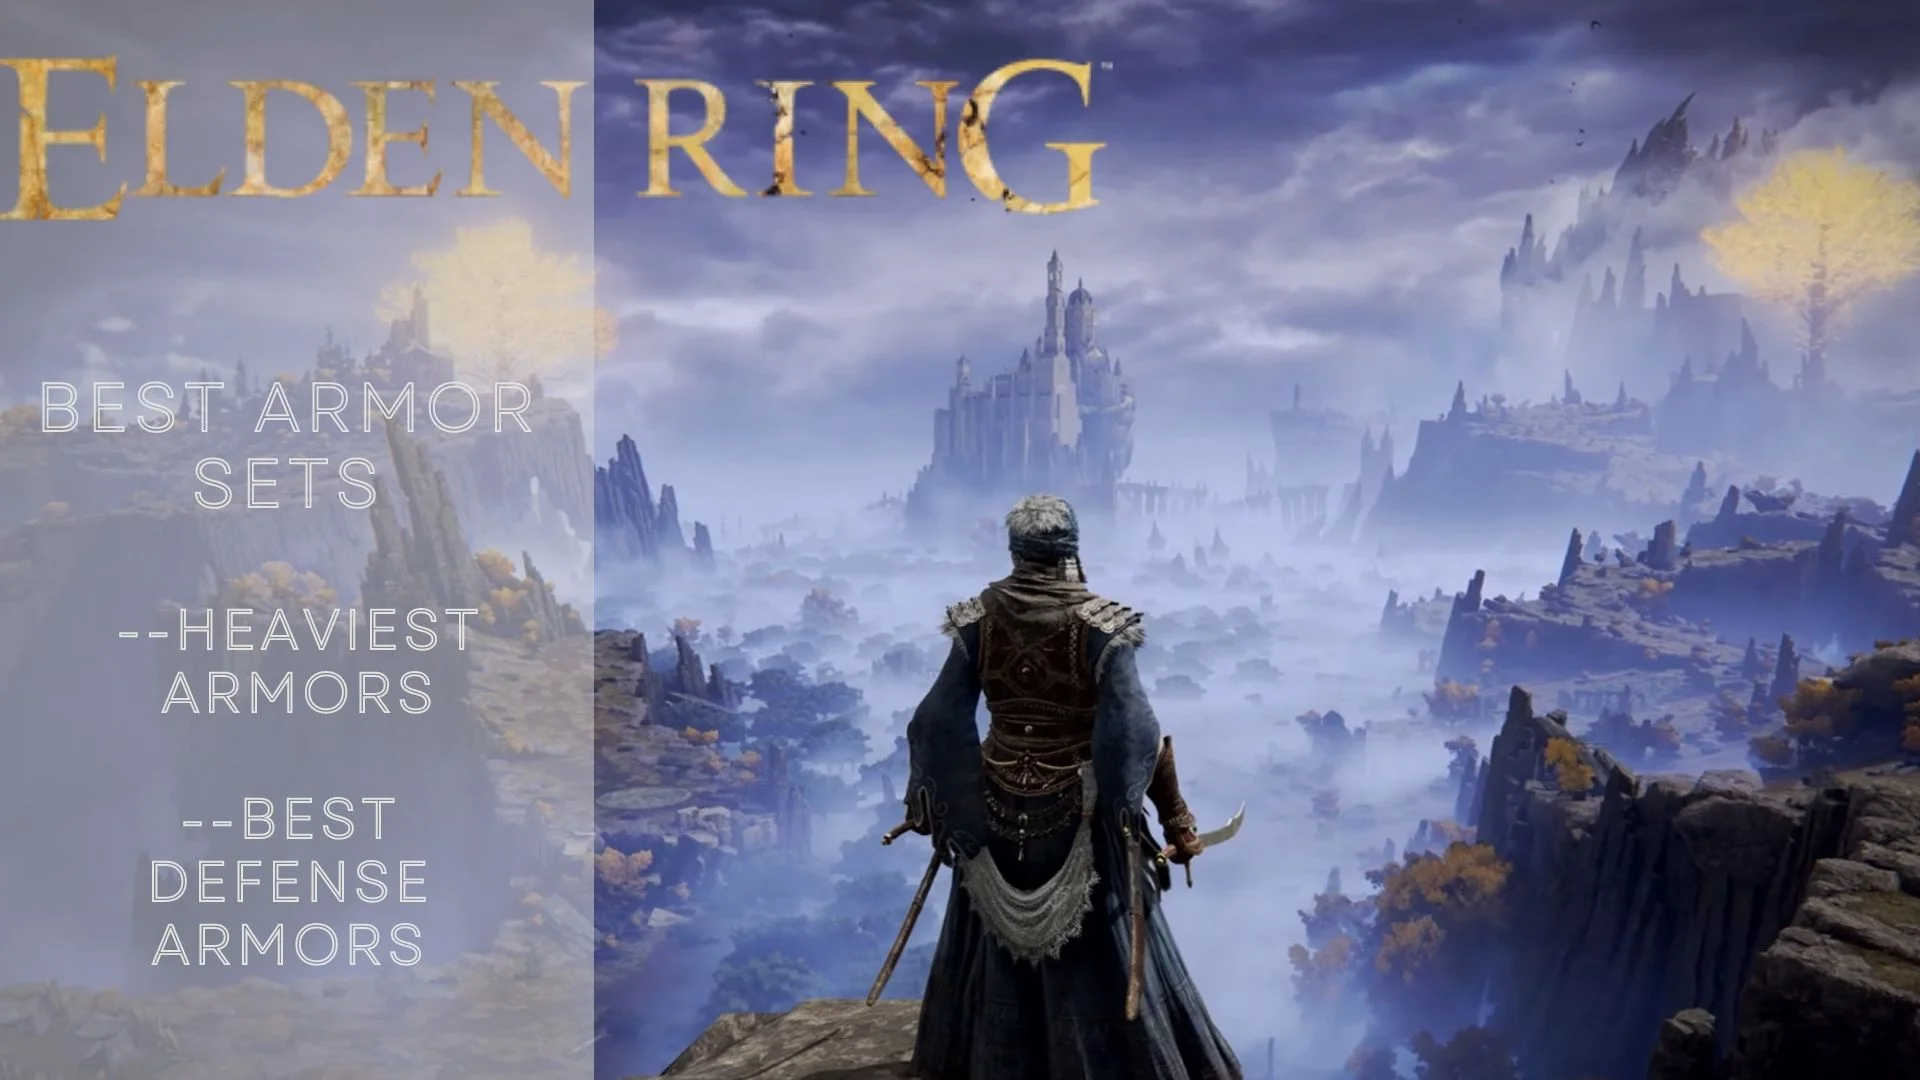 Best Elden Ring armor sets and locations